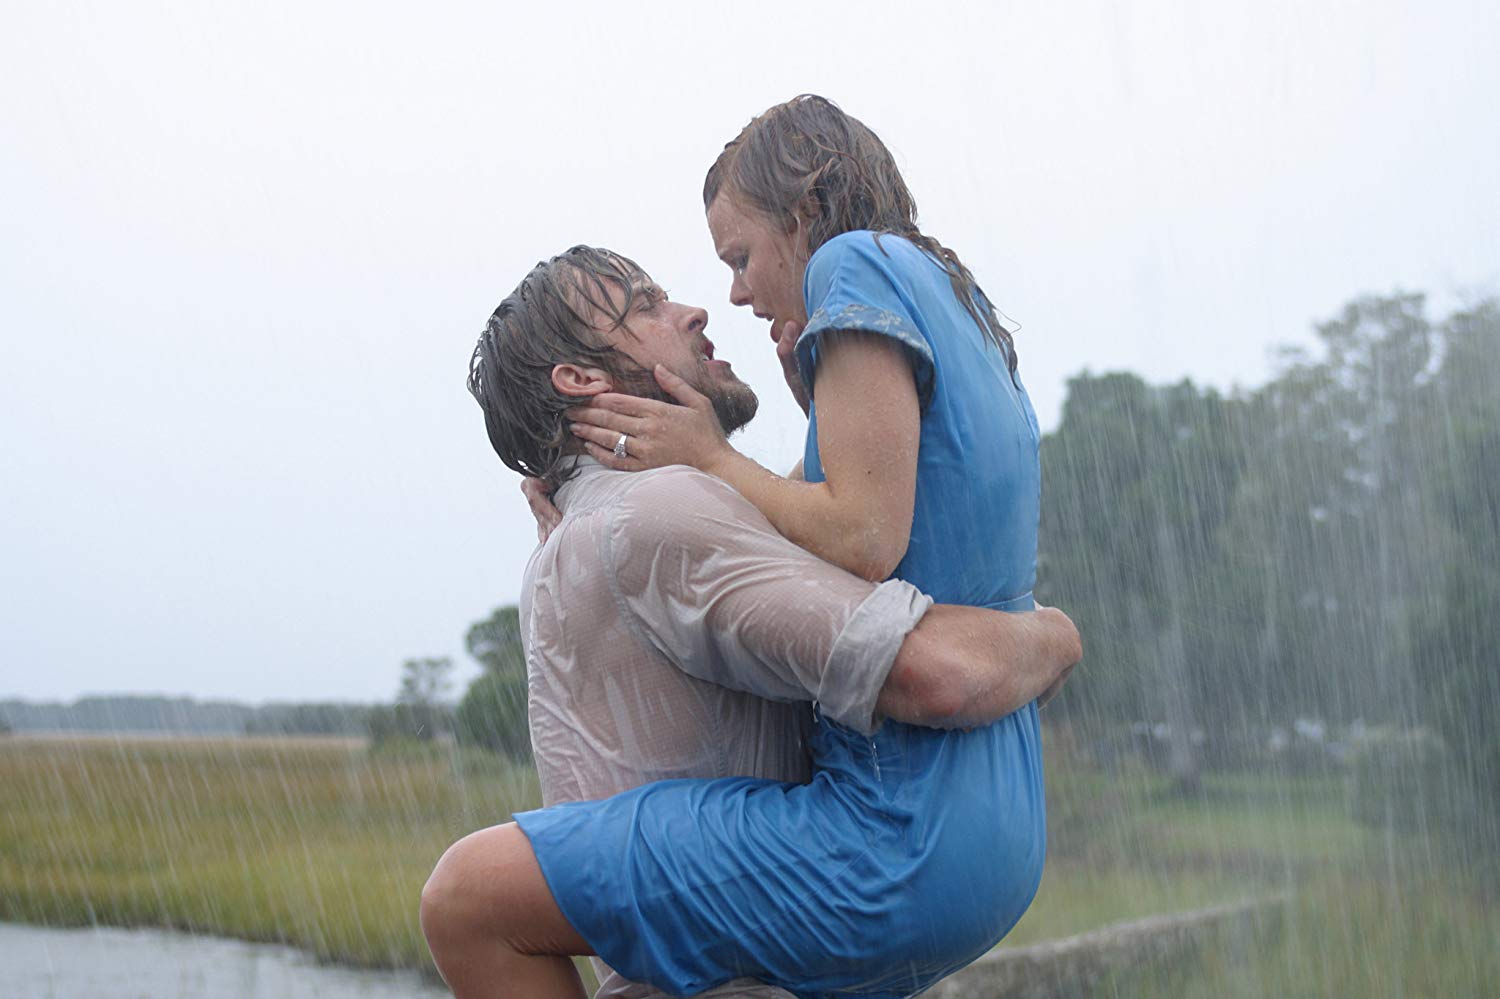 5 Things we can’t wait to see in the Broadway production of ‘The Notebook’